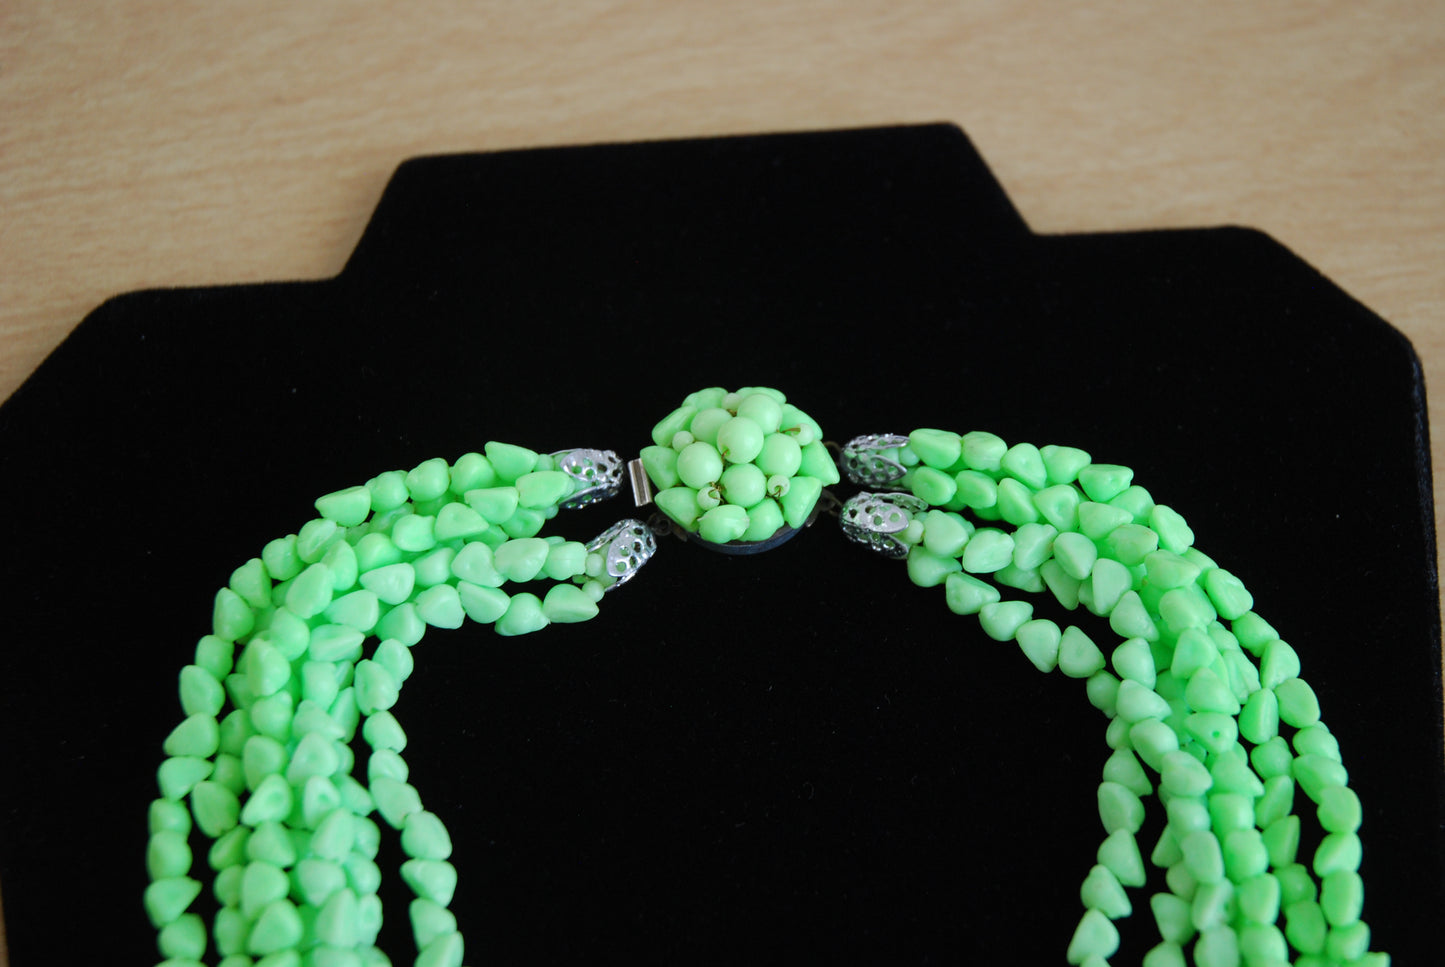 Lime Green Multi Strand Necklace